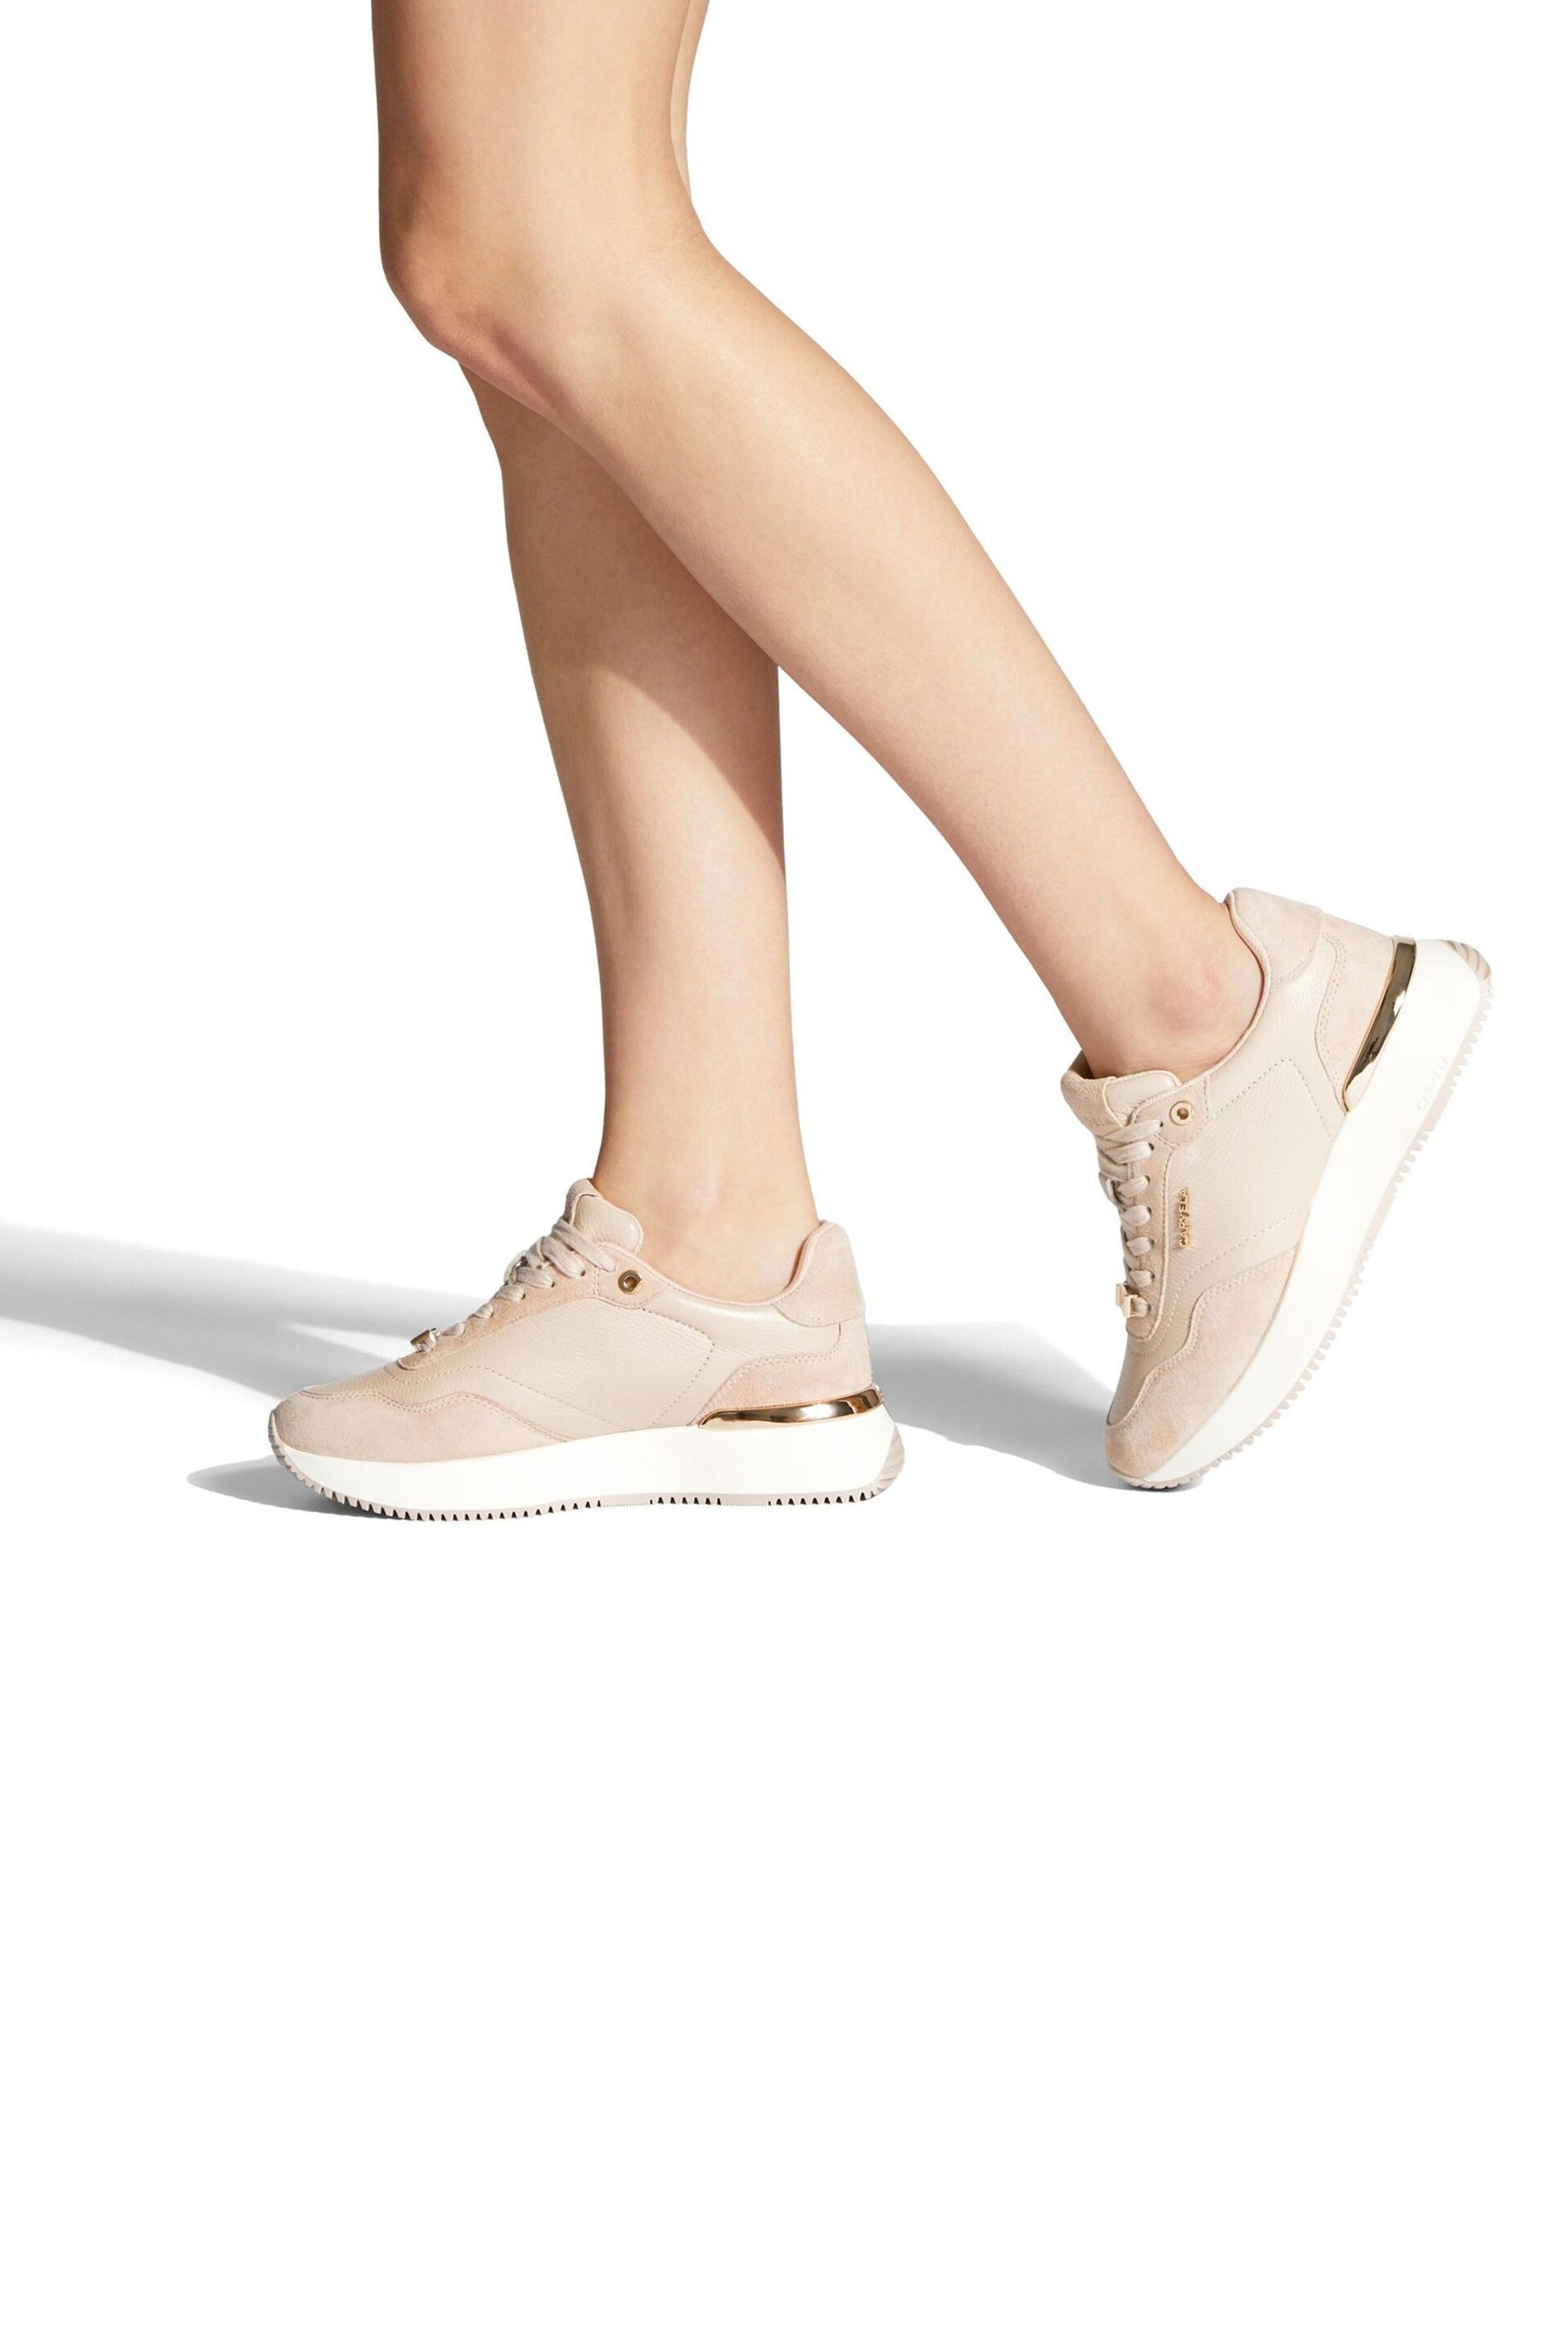 Carvela Flare Trainers - Image 5 of 5